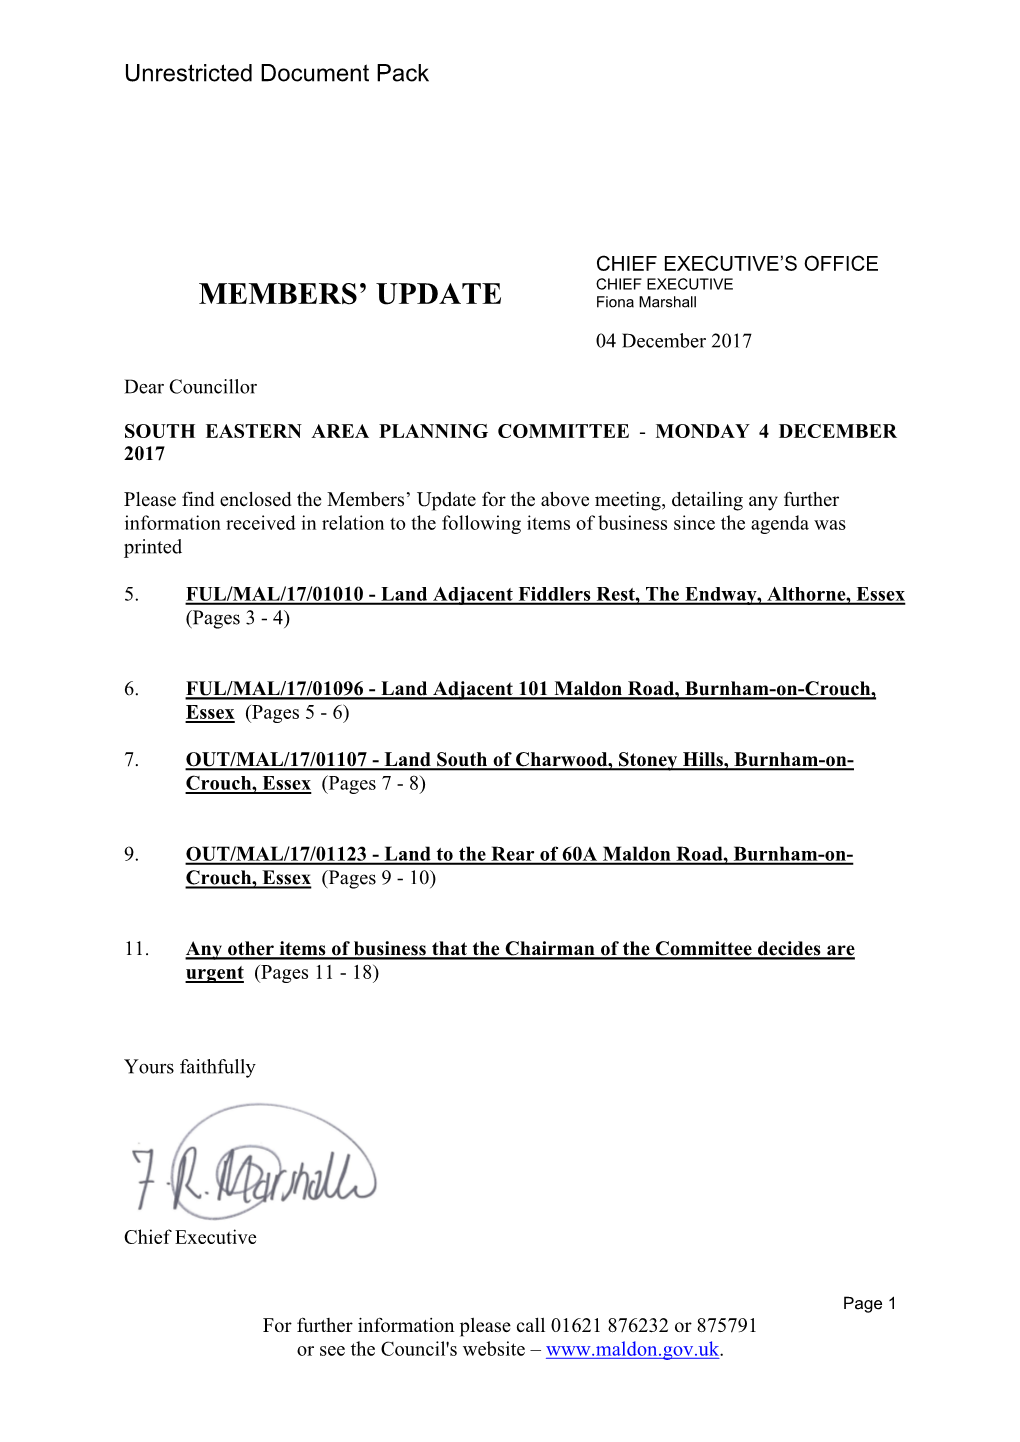 (Public Pack)Members' Update Agenda Supplement for South